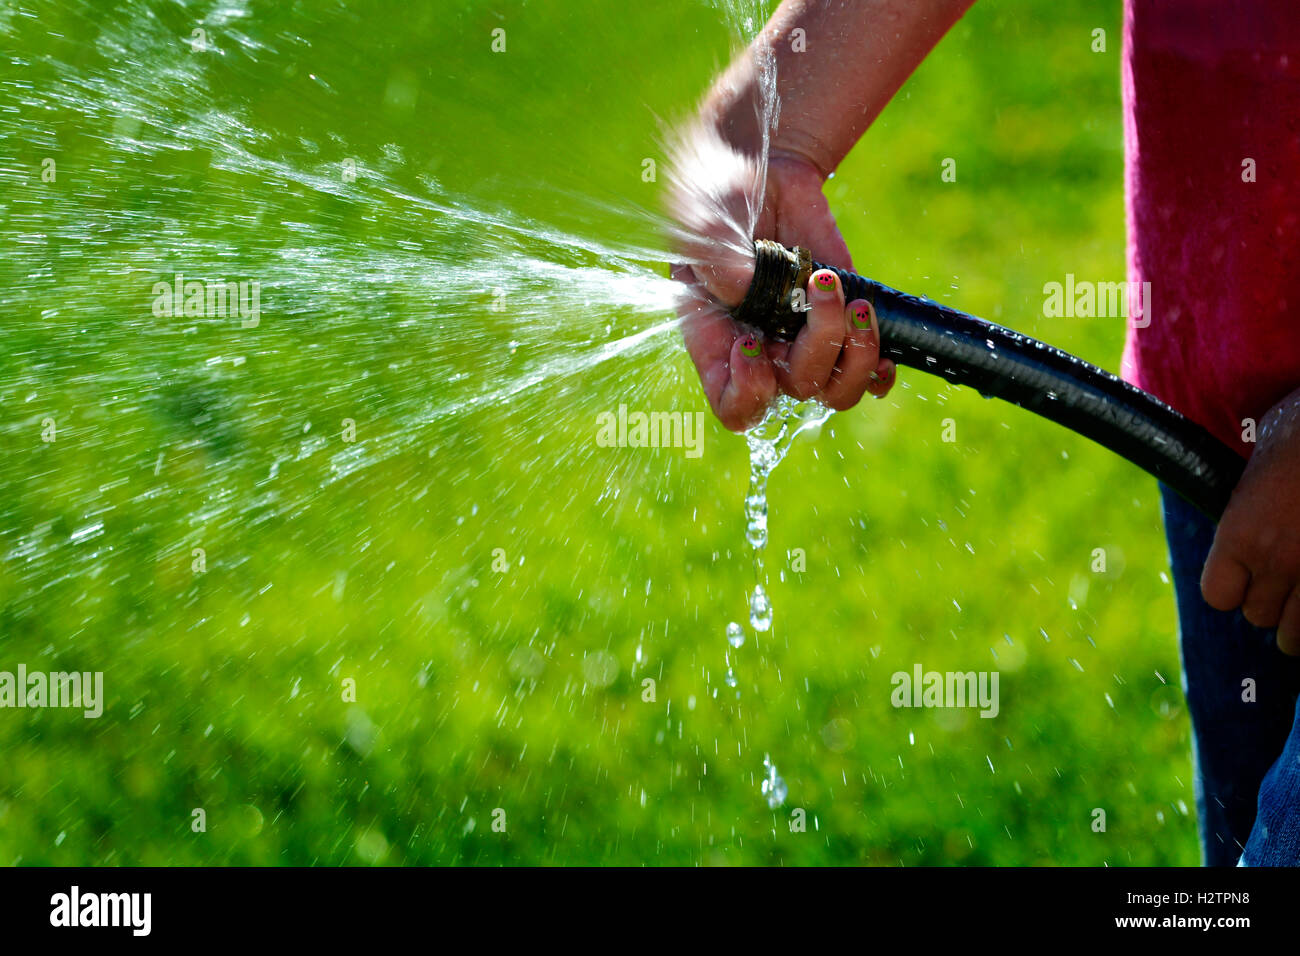 Hand and hose squirting shooting fresh water on green grass lawn Stock Photo